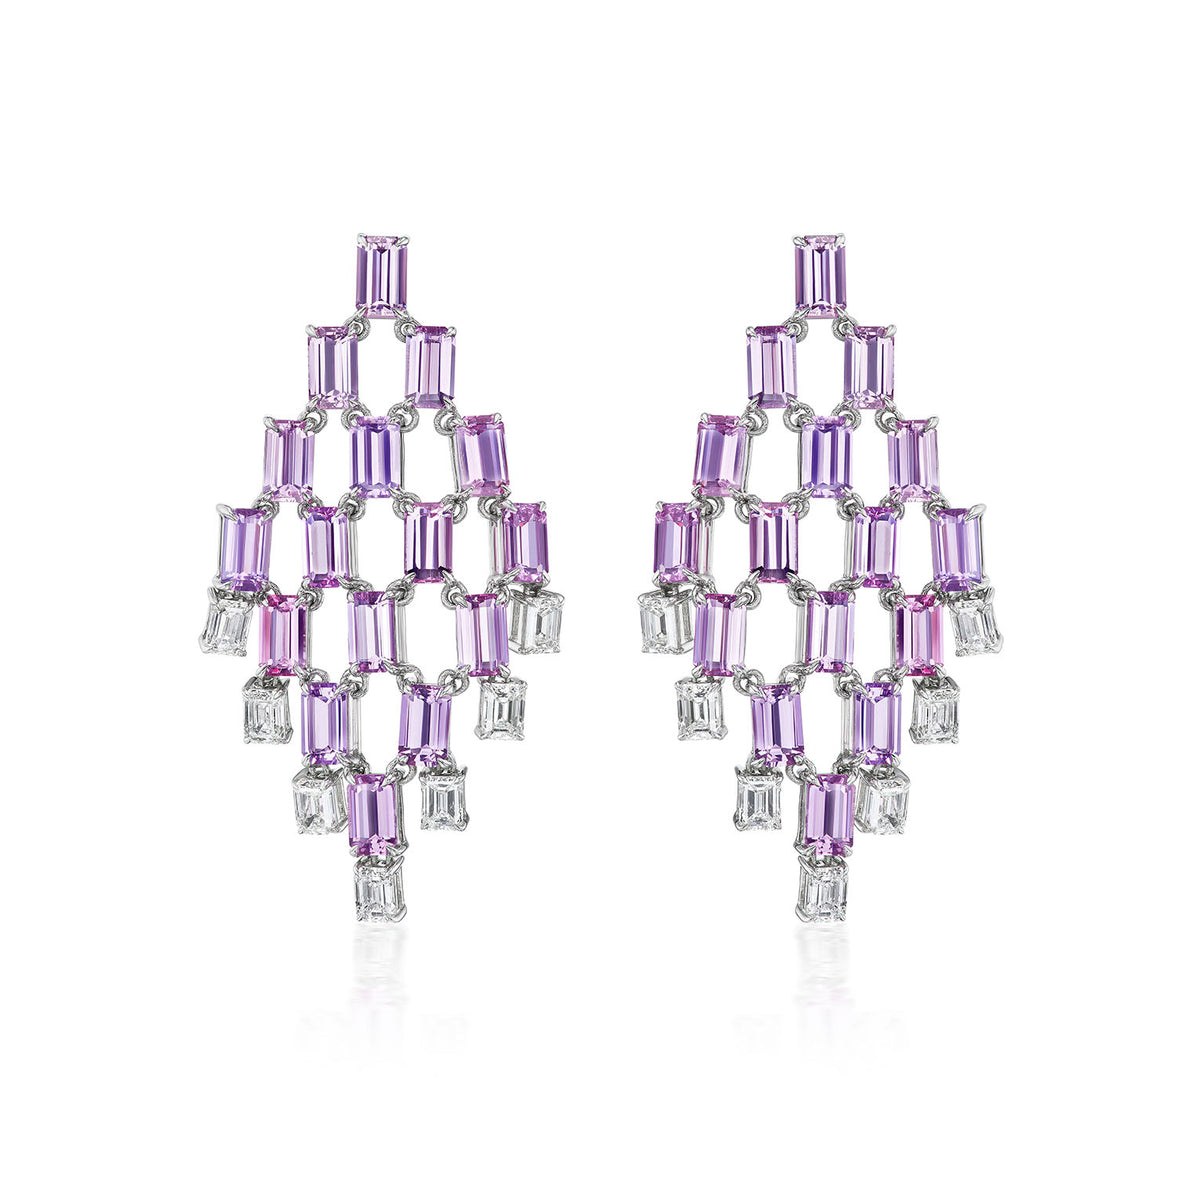 Art Deco Chandelier Earrings in White Gold with Emerald Cut Diamonds and Lavendar Sapphires